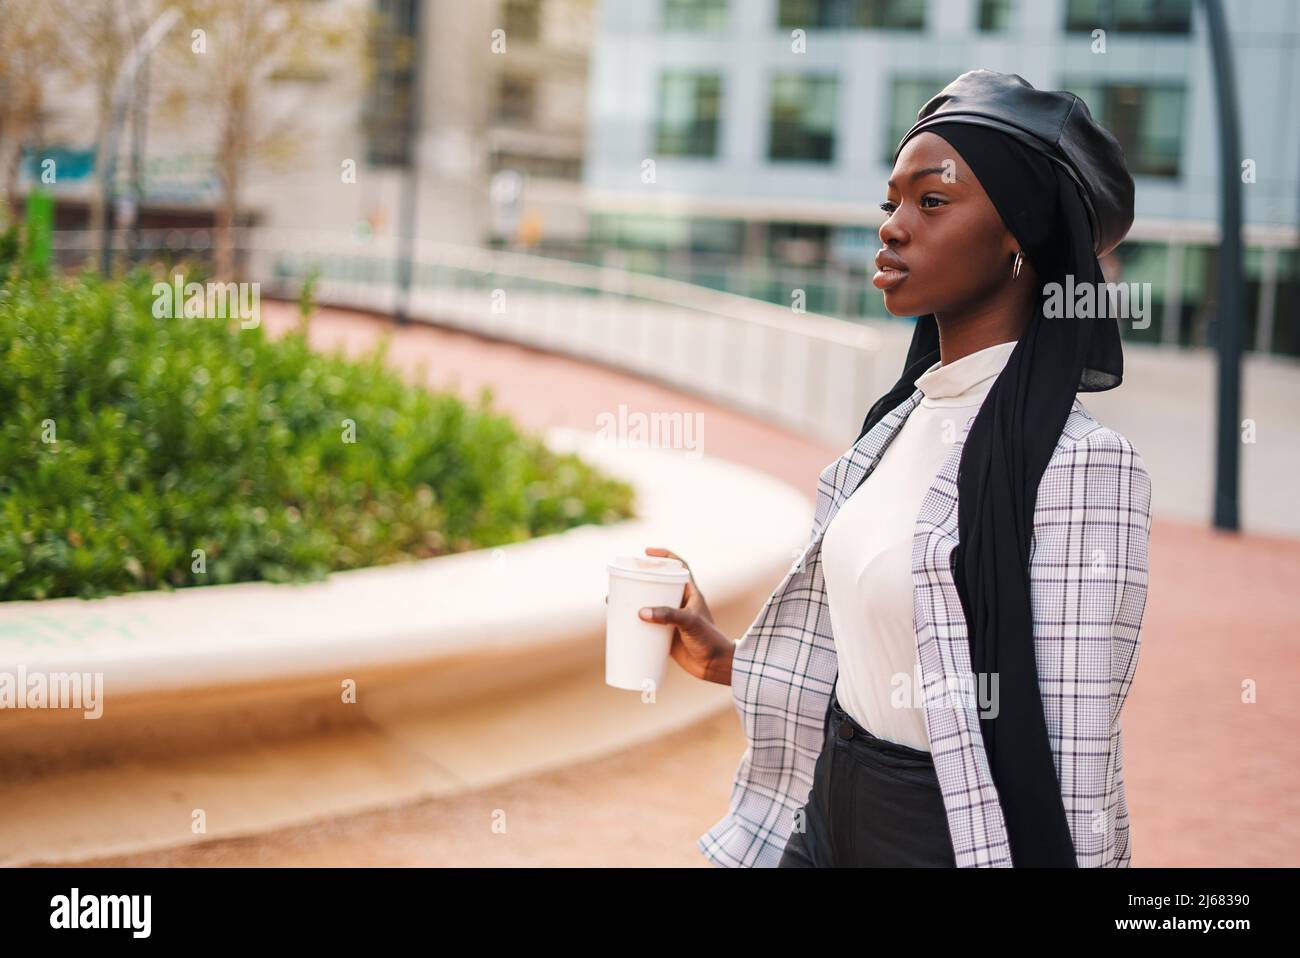 Black woman in headscarf with takeaway beverage in park Stock Photo